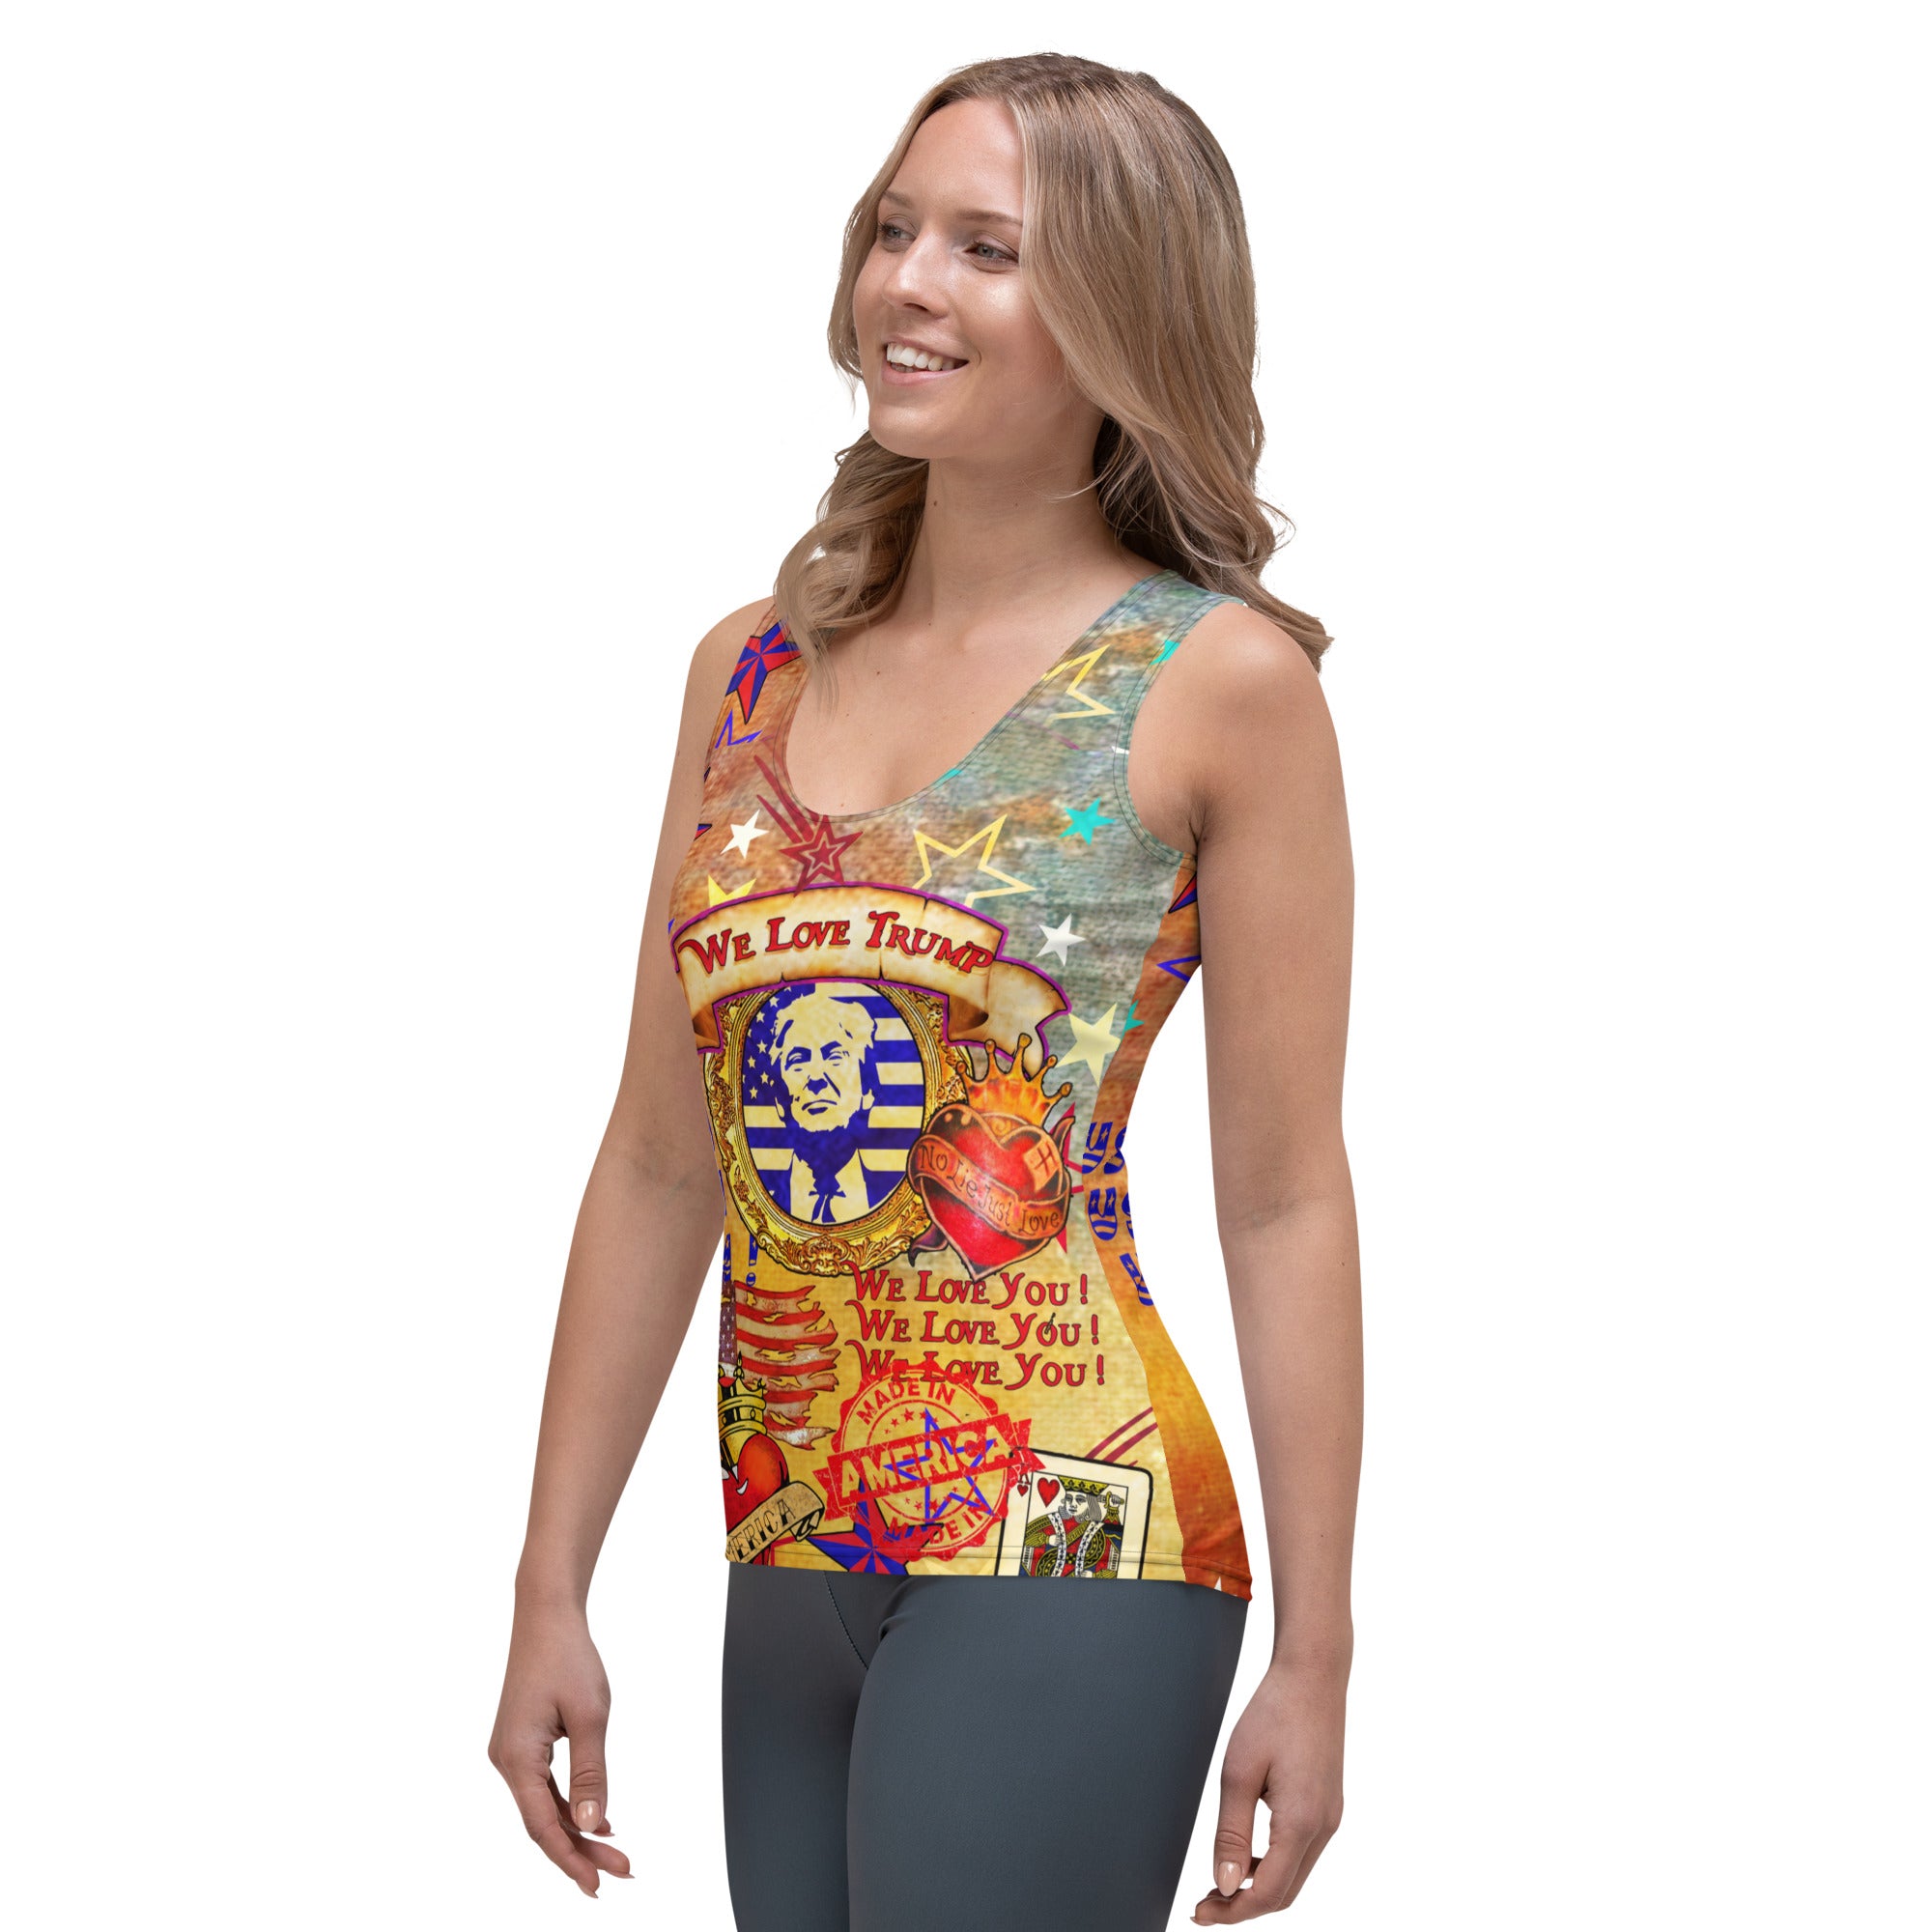 "THE WE LOVE TRUMP TANK" for women